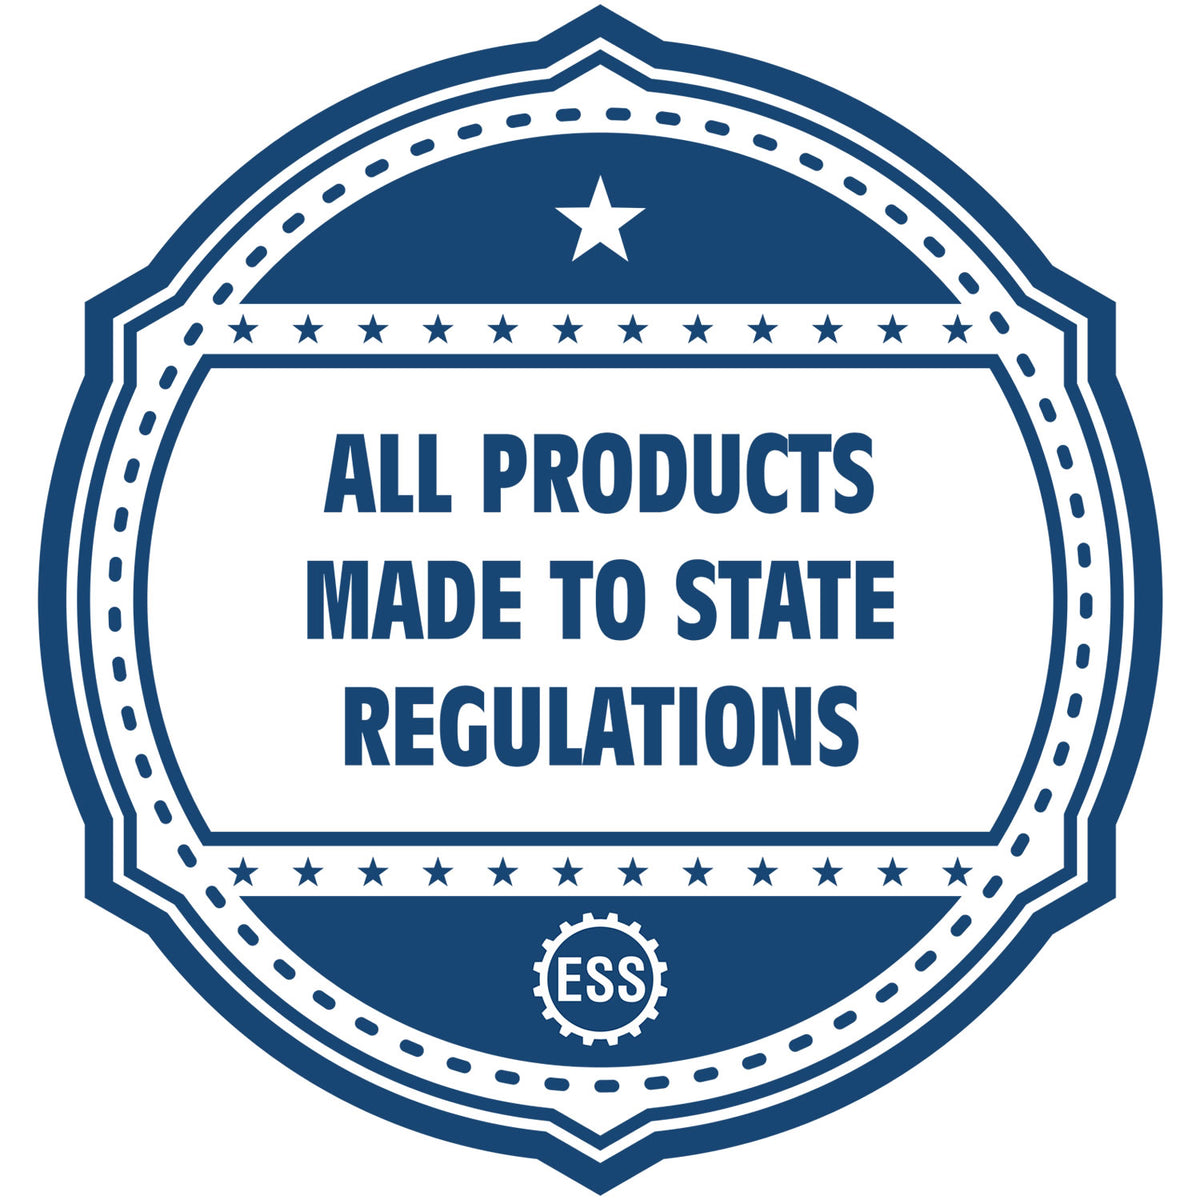 An icon or badge element for the Super Slim Vermont Notary Public Stamp showing that this product is made in compliance with state regulations.